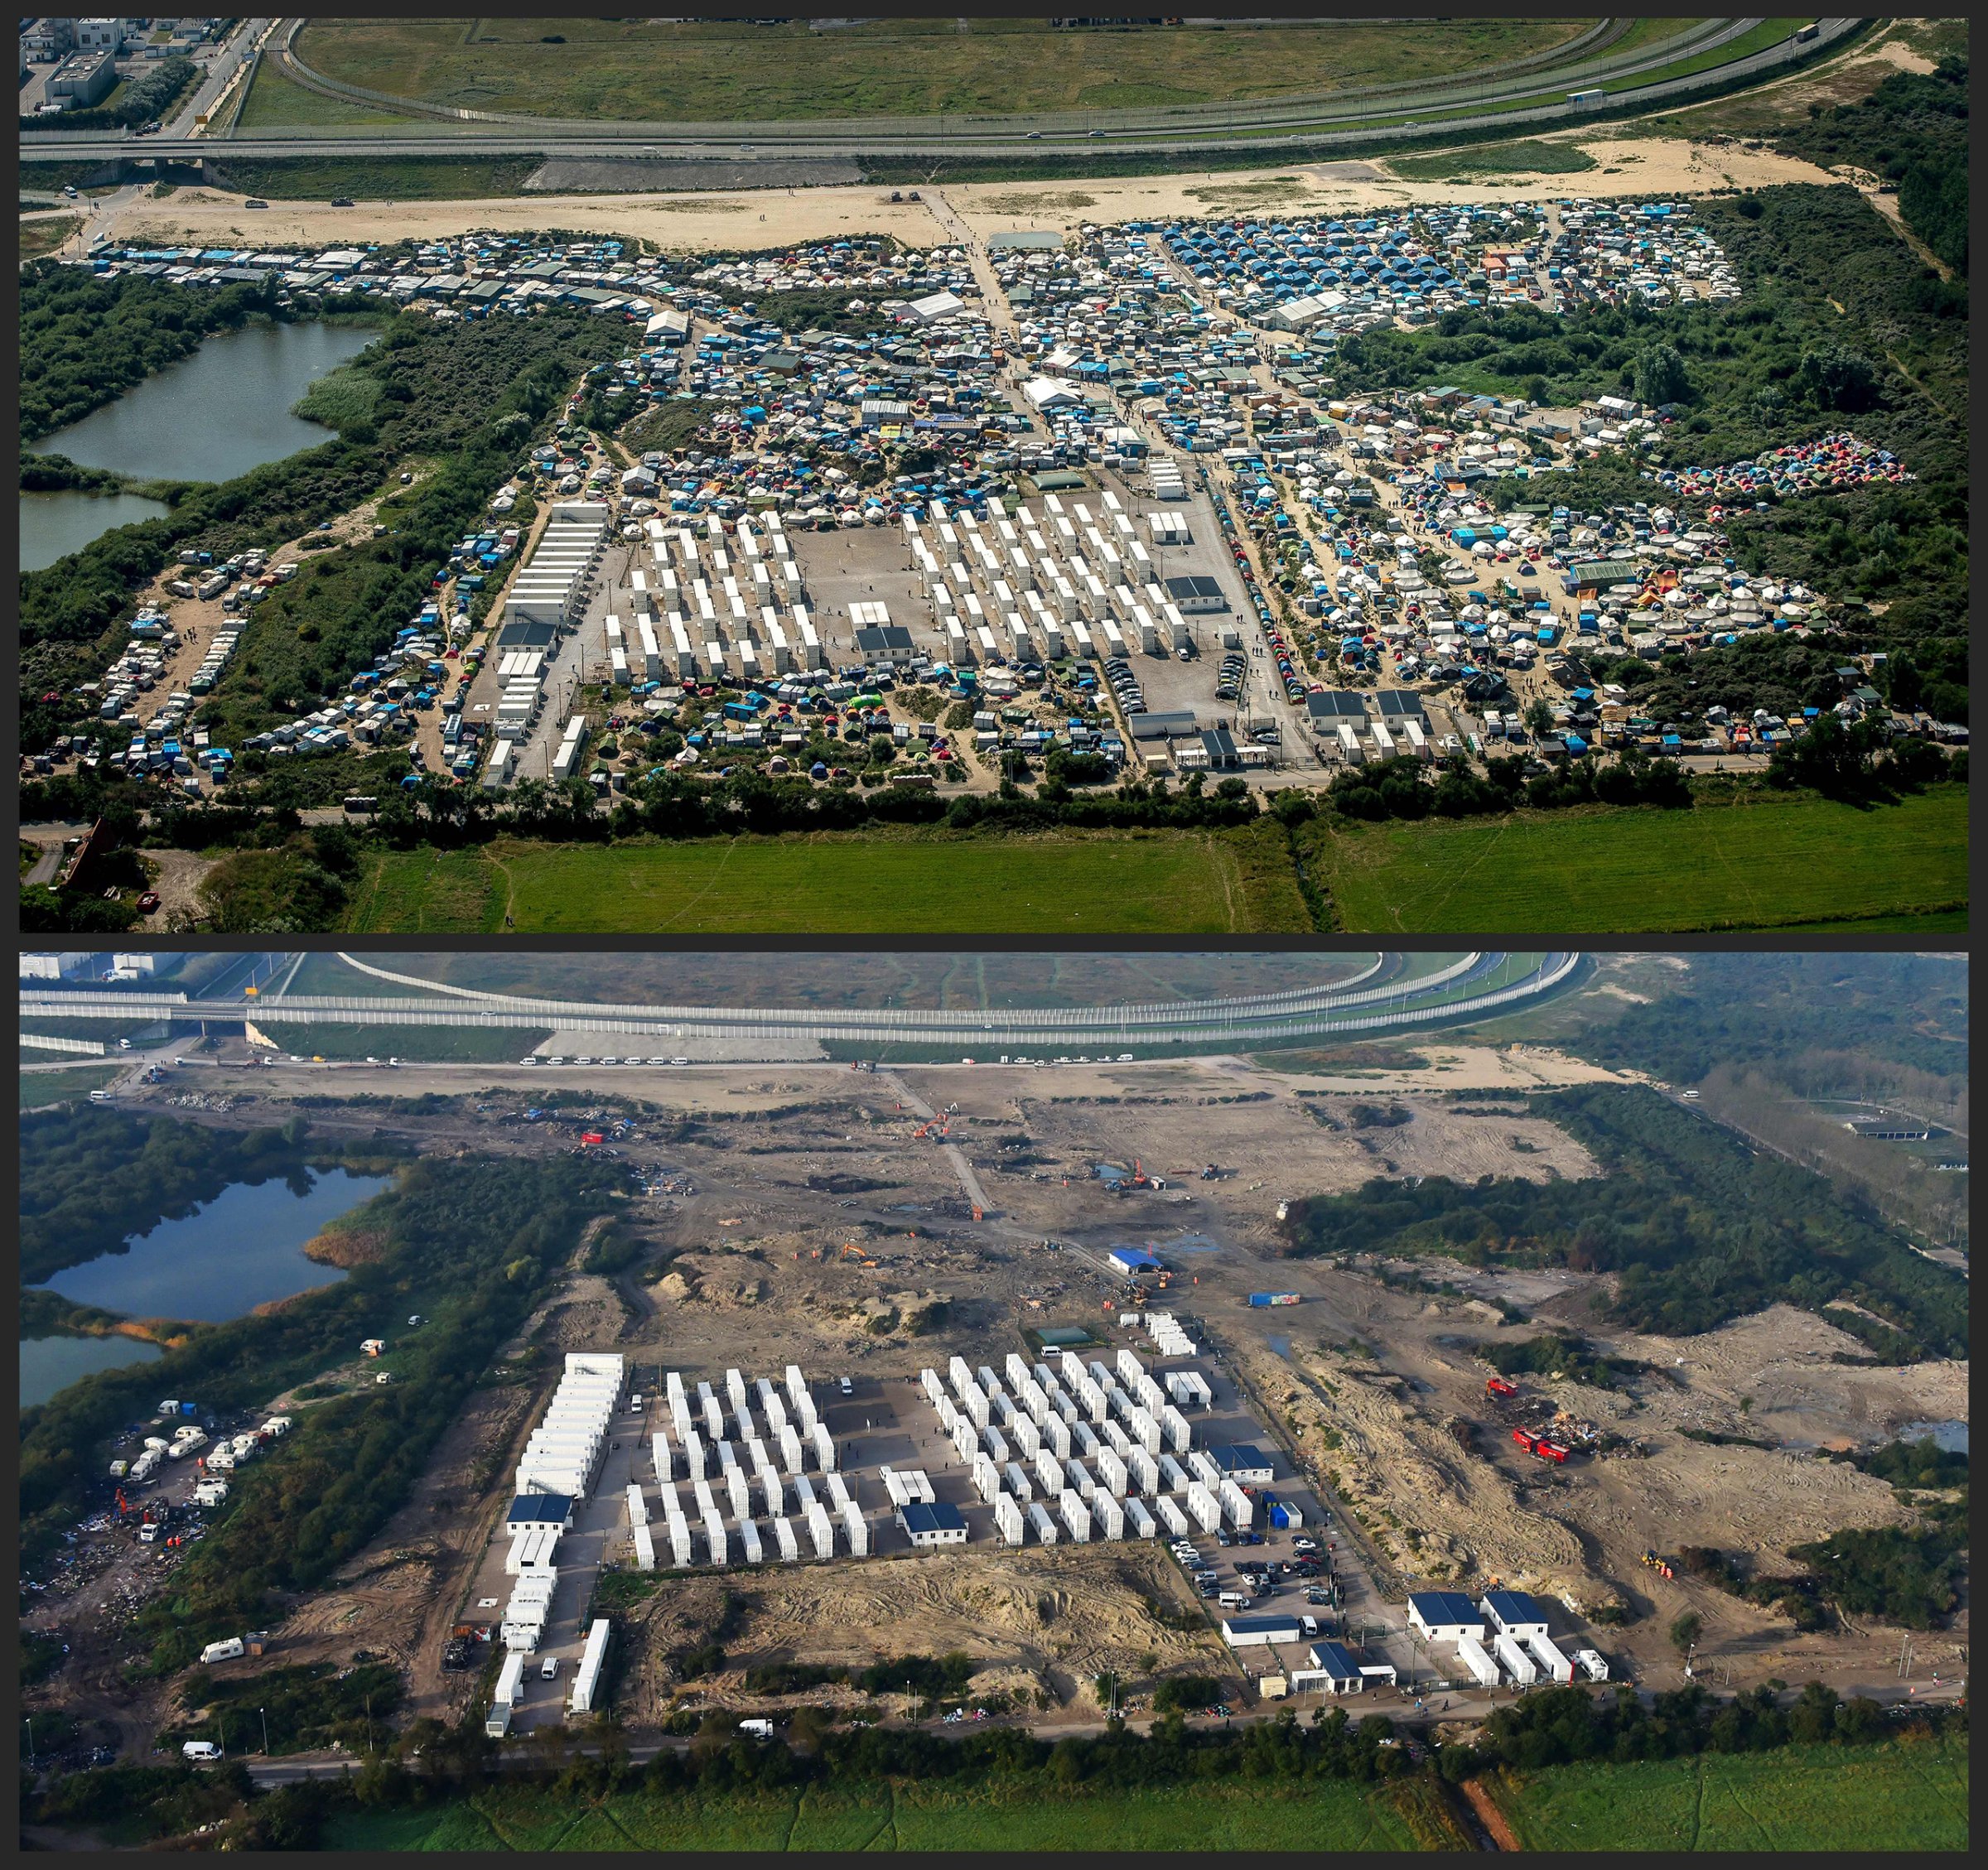 A combination shows two aerial views of the "Jungle" camp in Calais, northern France, on Aug. 16, 2016 and Nov. 1, 2016. The bottom picture shows the aftermath of forced evictions of thousands of migrants and demolition of the shacks in which they slept.